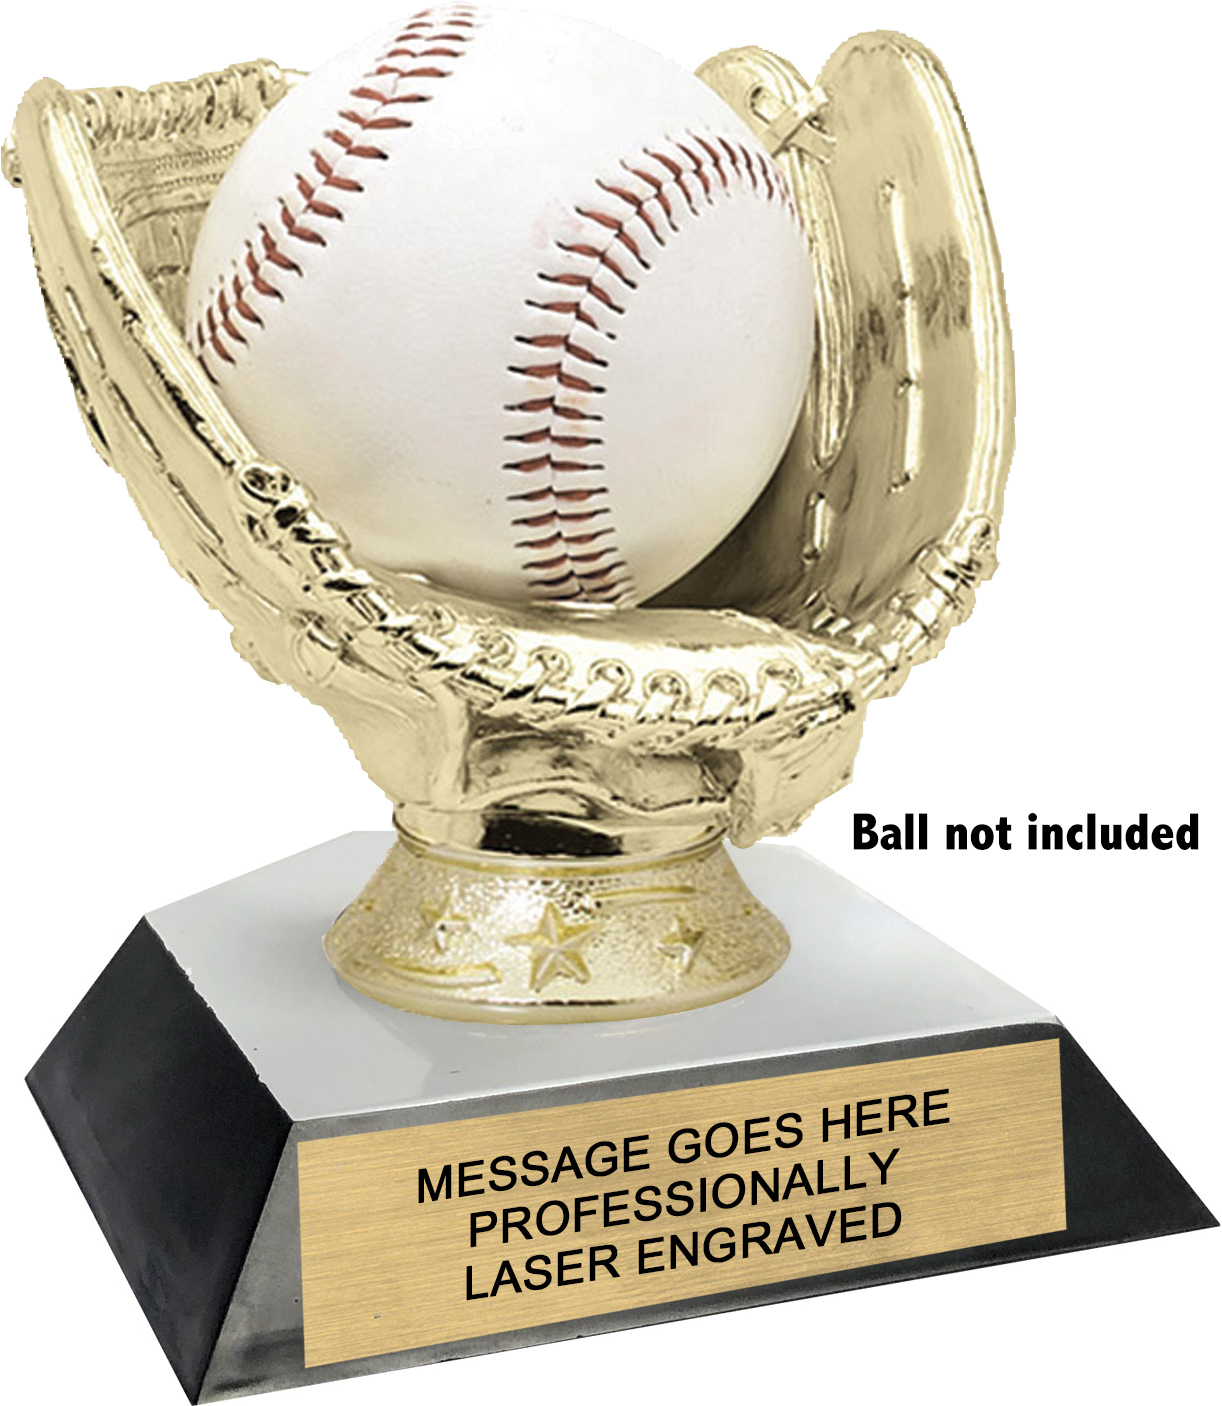 BASEBALL GLOVE STYLE BALL HOLDER PERSONALIZED TROPHY FREE ENGRAVING  BRIGHT GOLD 